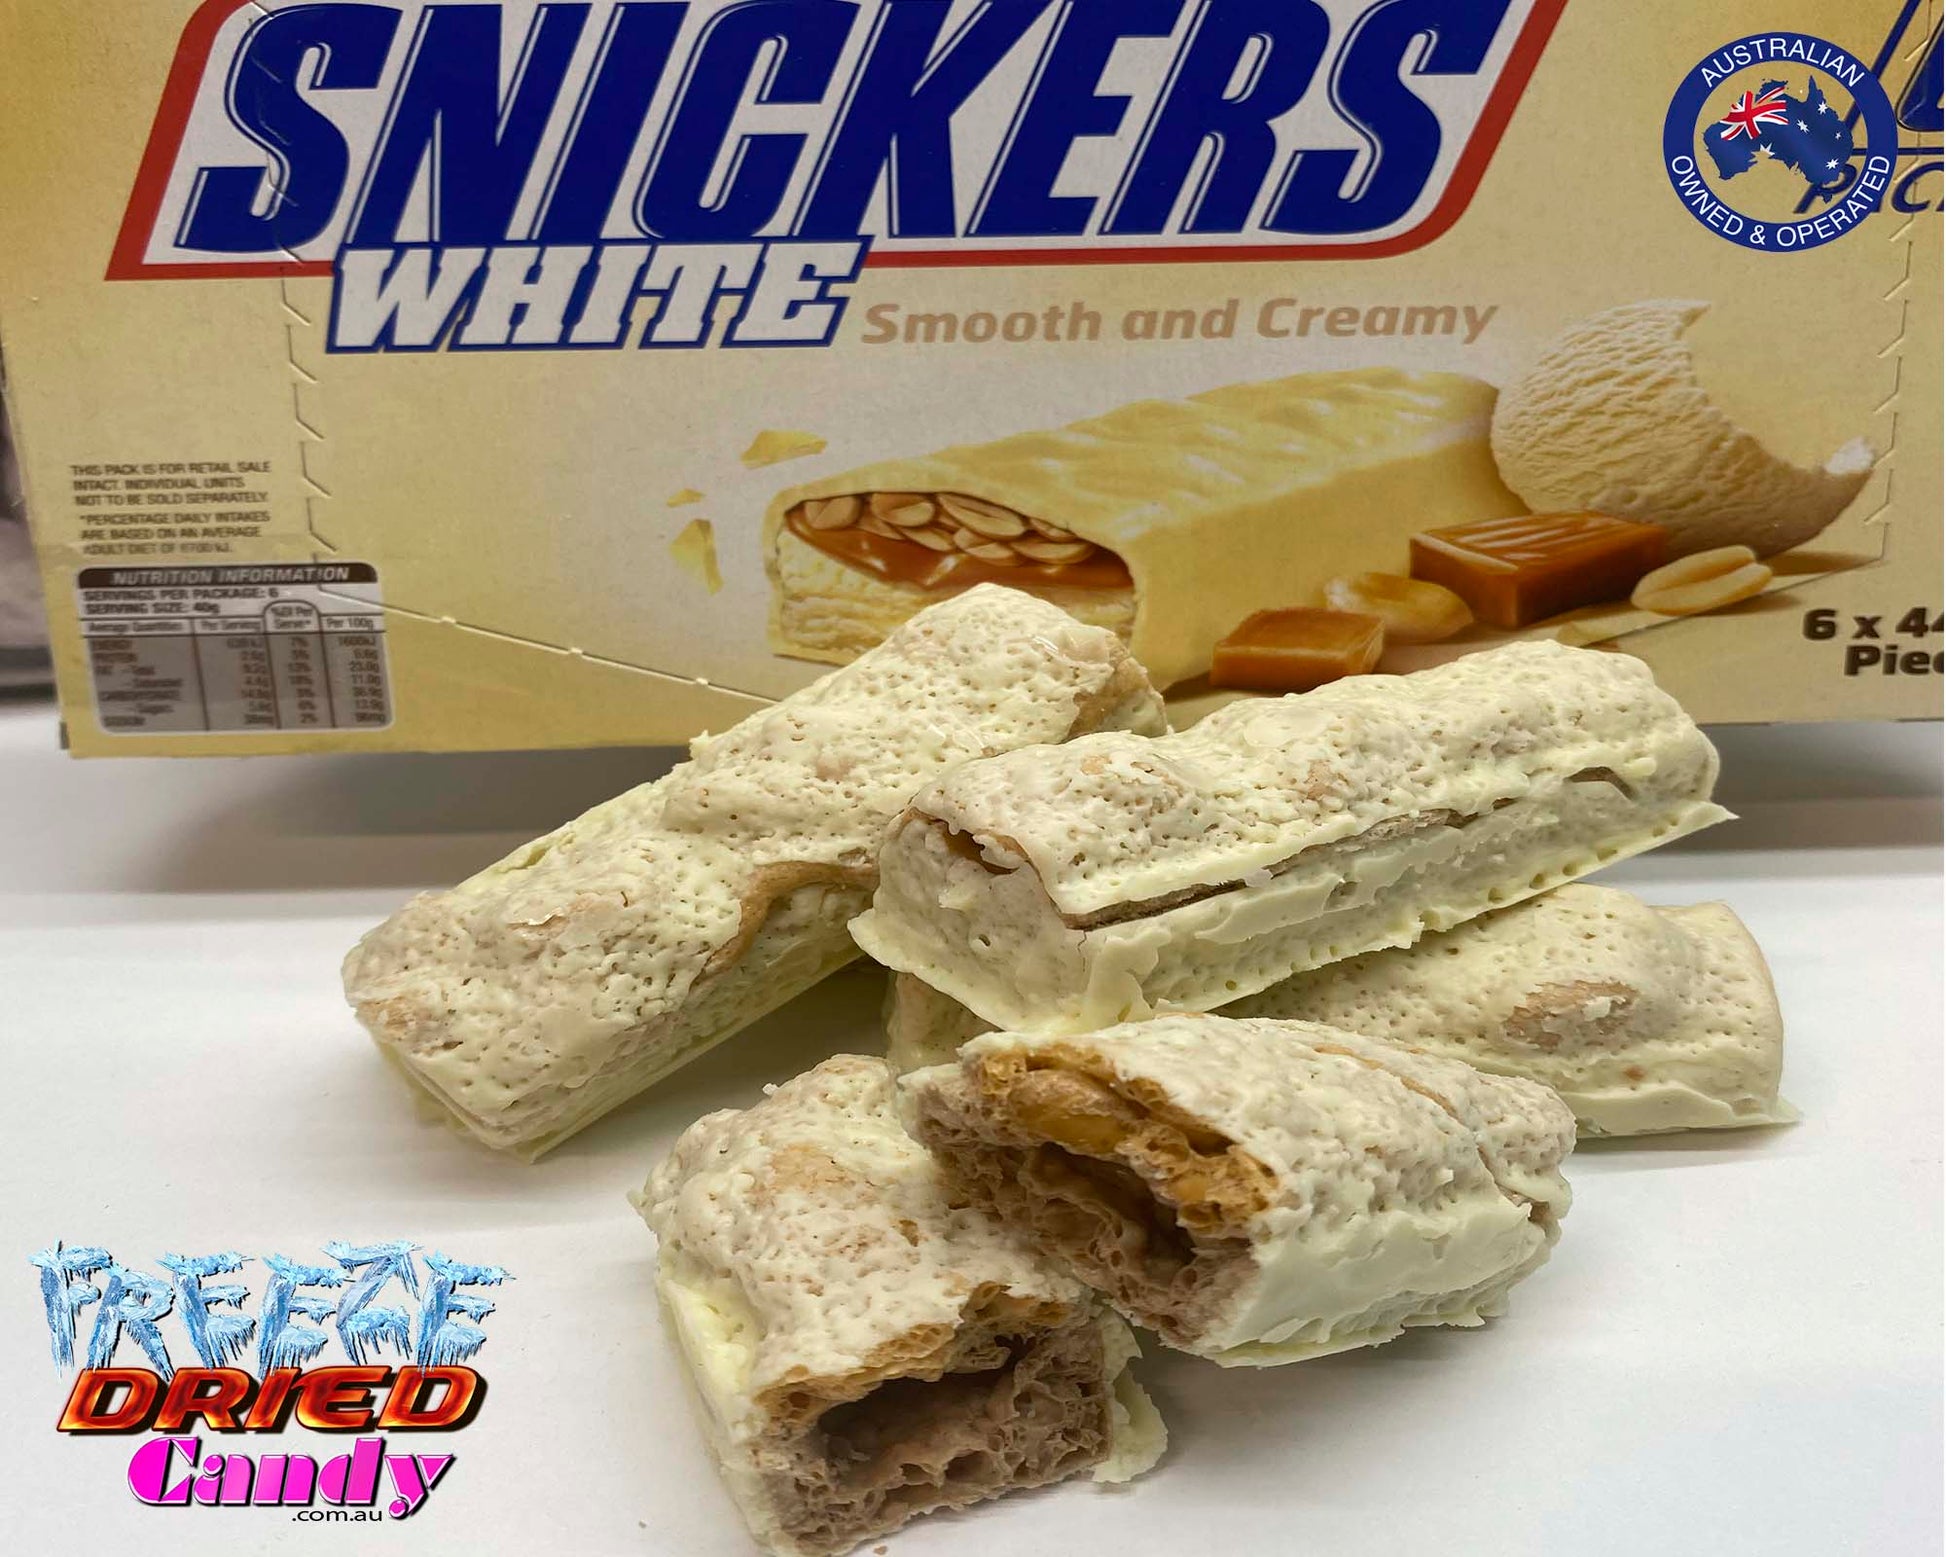 Freeze Dried Ice Cream Snickers Bar  are packed with peanuts, caramel, a creamy centre and coated in white chocolate.   Very moreish. After being freeze dried the ice cream is crunchy, the flavor is intensified and has 0% moisture content-  These are delicious and decadent!